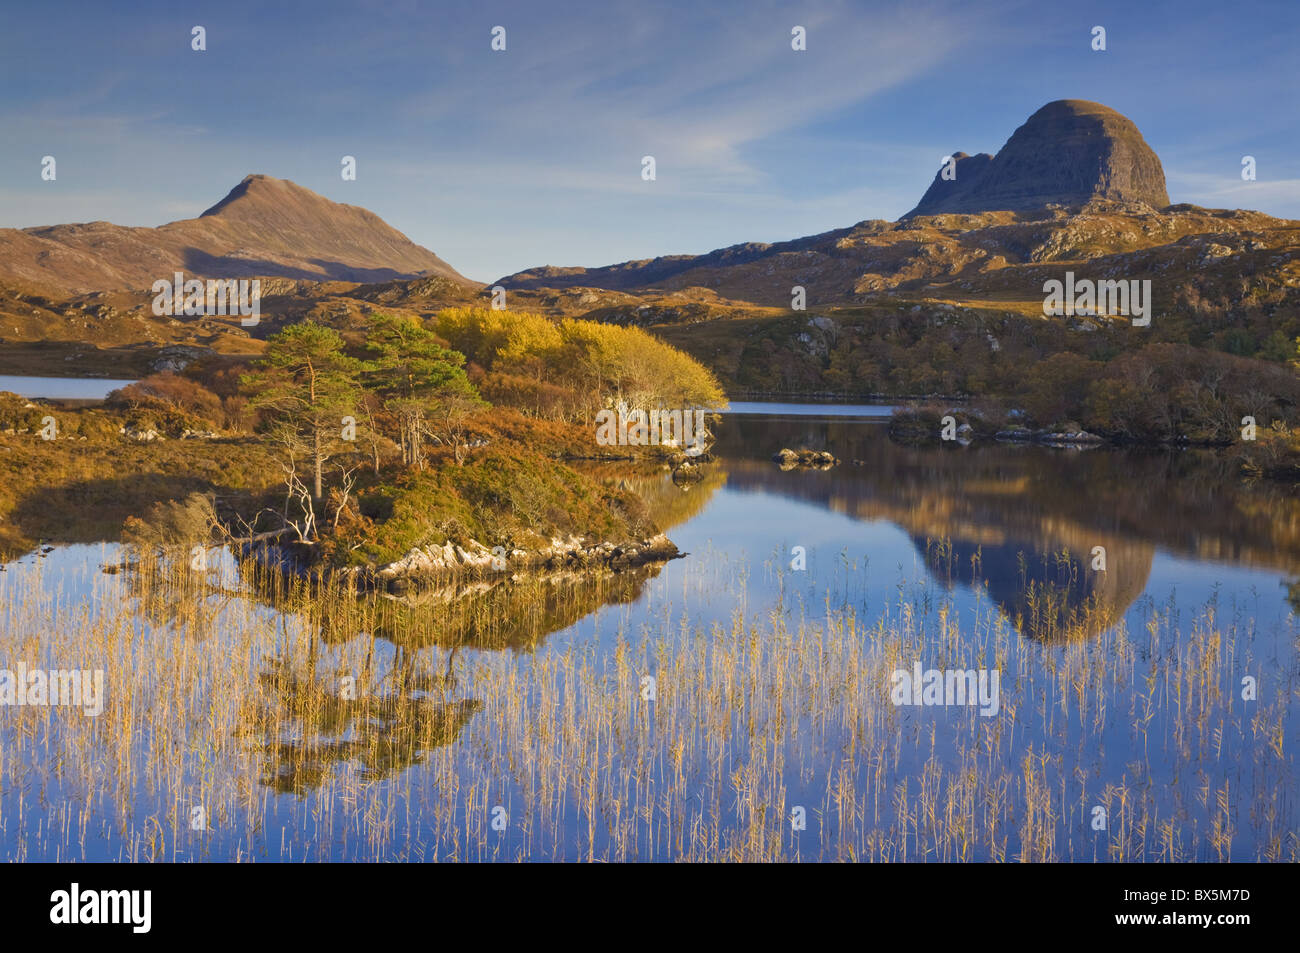 Two mountains of Suilven and Canisp from Loch Druim Suardalain, Sutherland, North west Scotland, United Kingdom, Europe Stock Photo